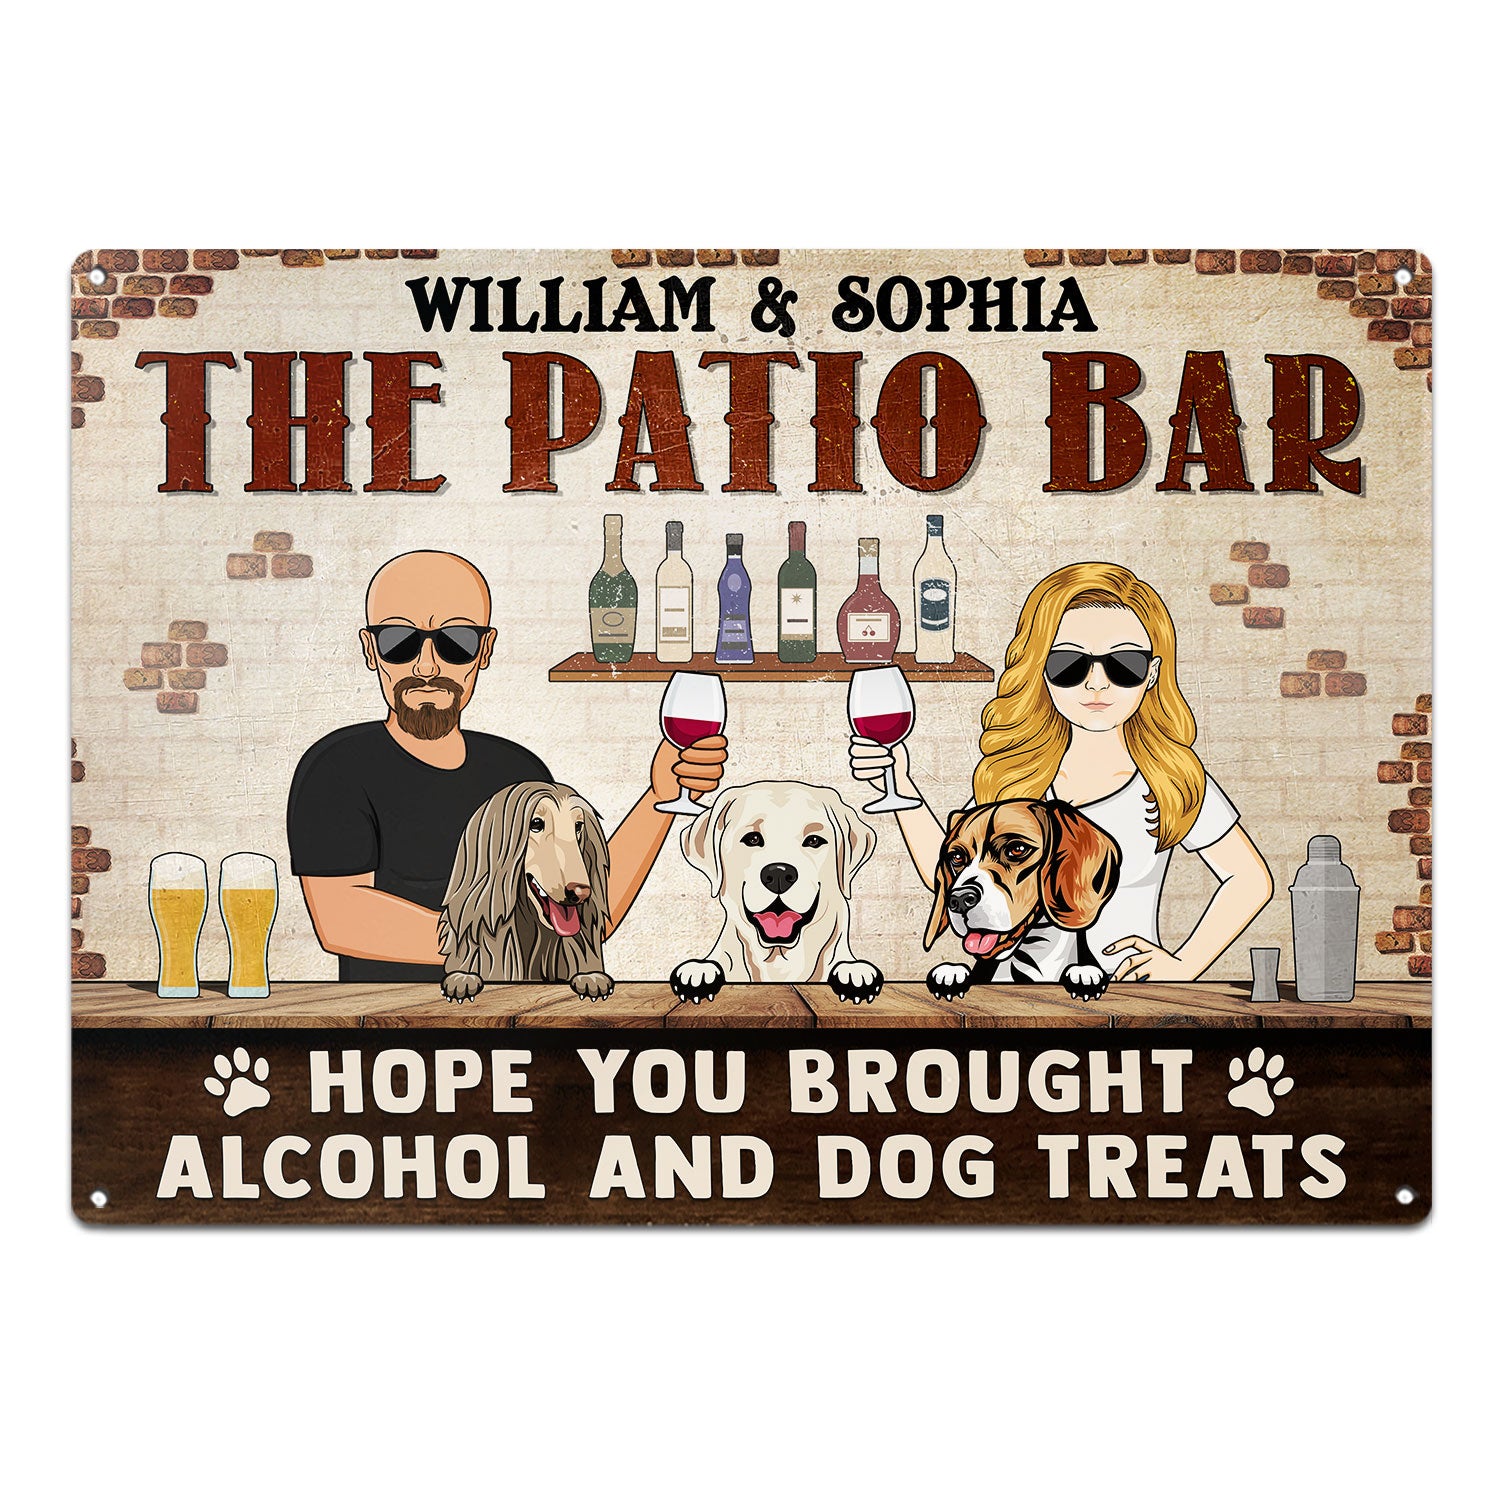 Hope You Brought Alcohol And Dog Treats Cat Treats - Home Decor, Backyard Sign, Gift For Couple, Husband, Wife, Pet Lovers - Personalized Custom Classic Metal Signs